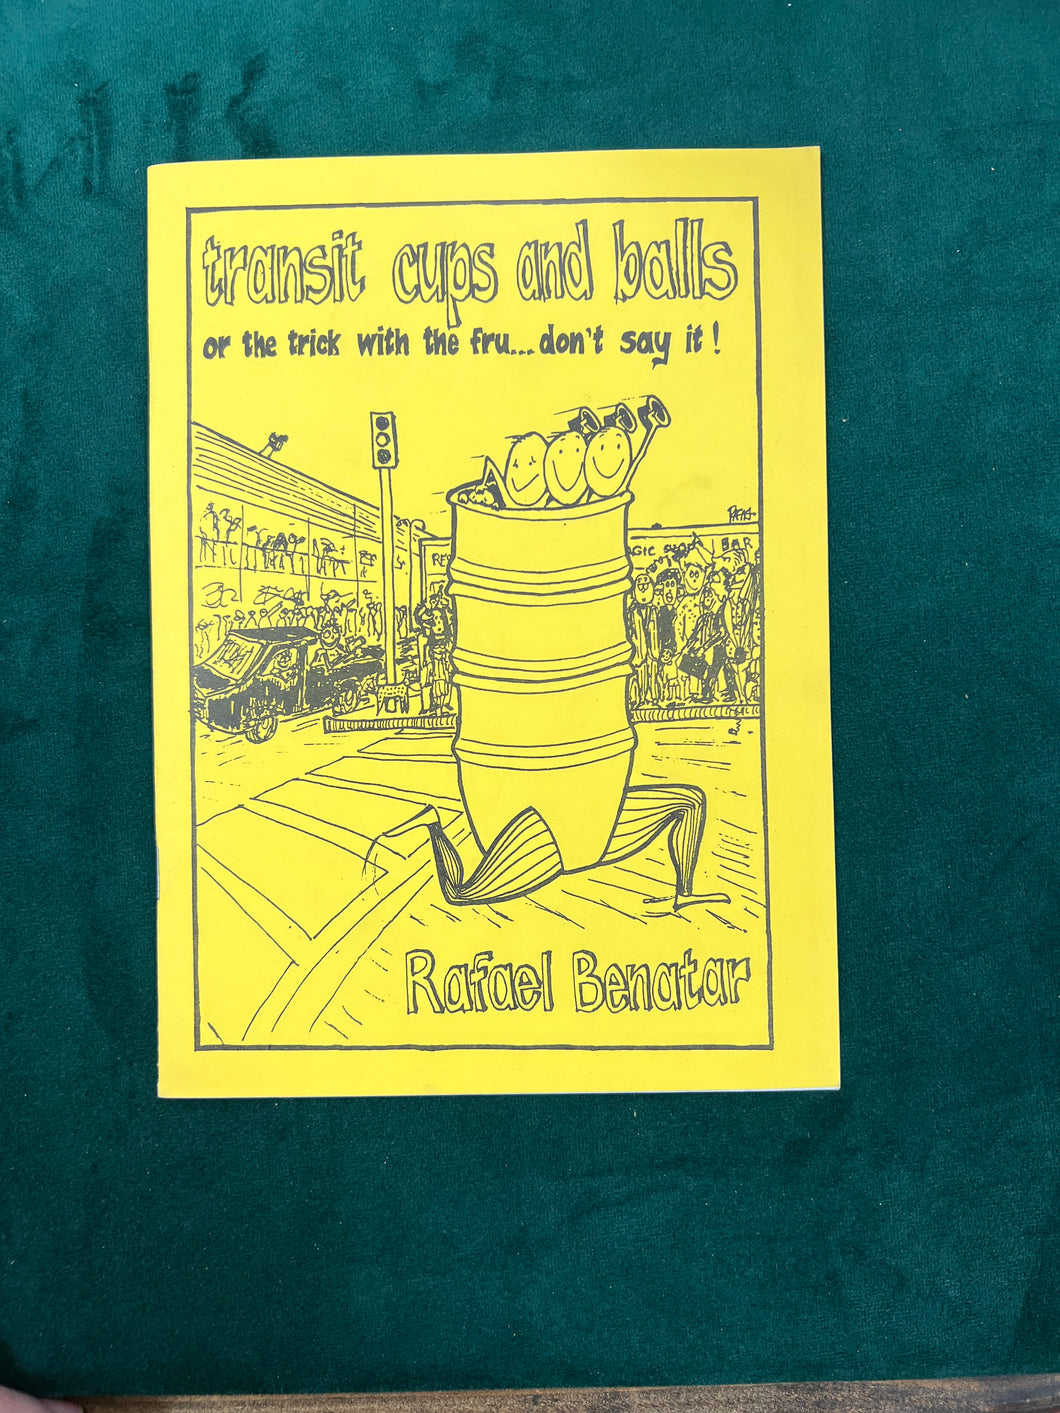 Transit Cups and Balls or the Trick with the fru... Don't Say It! by Rafael Benatar